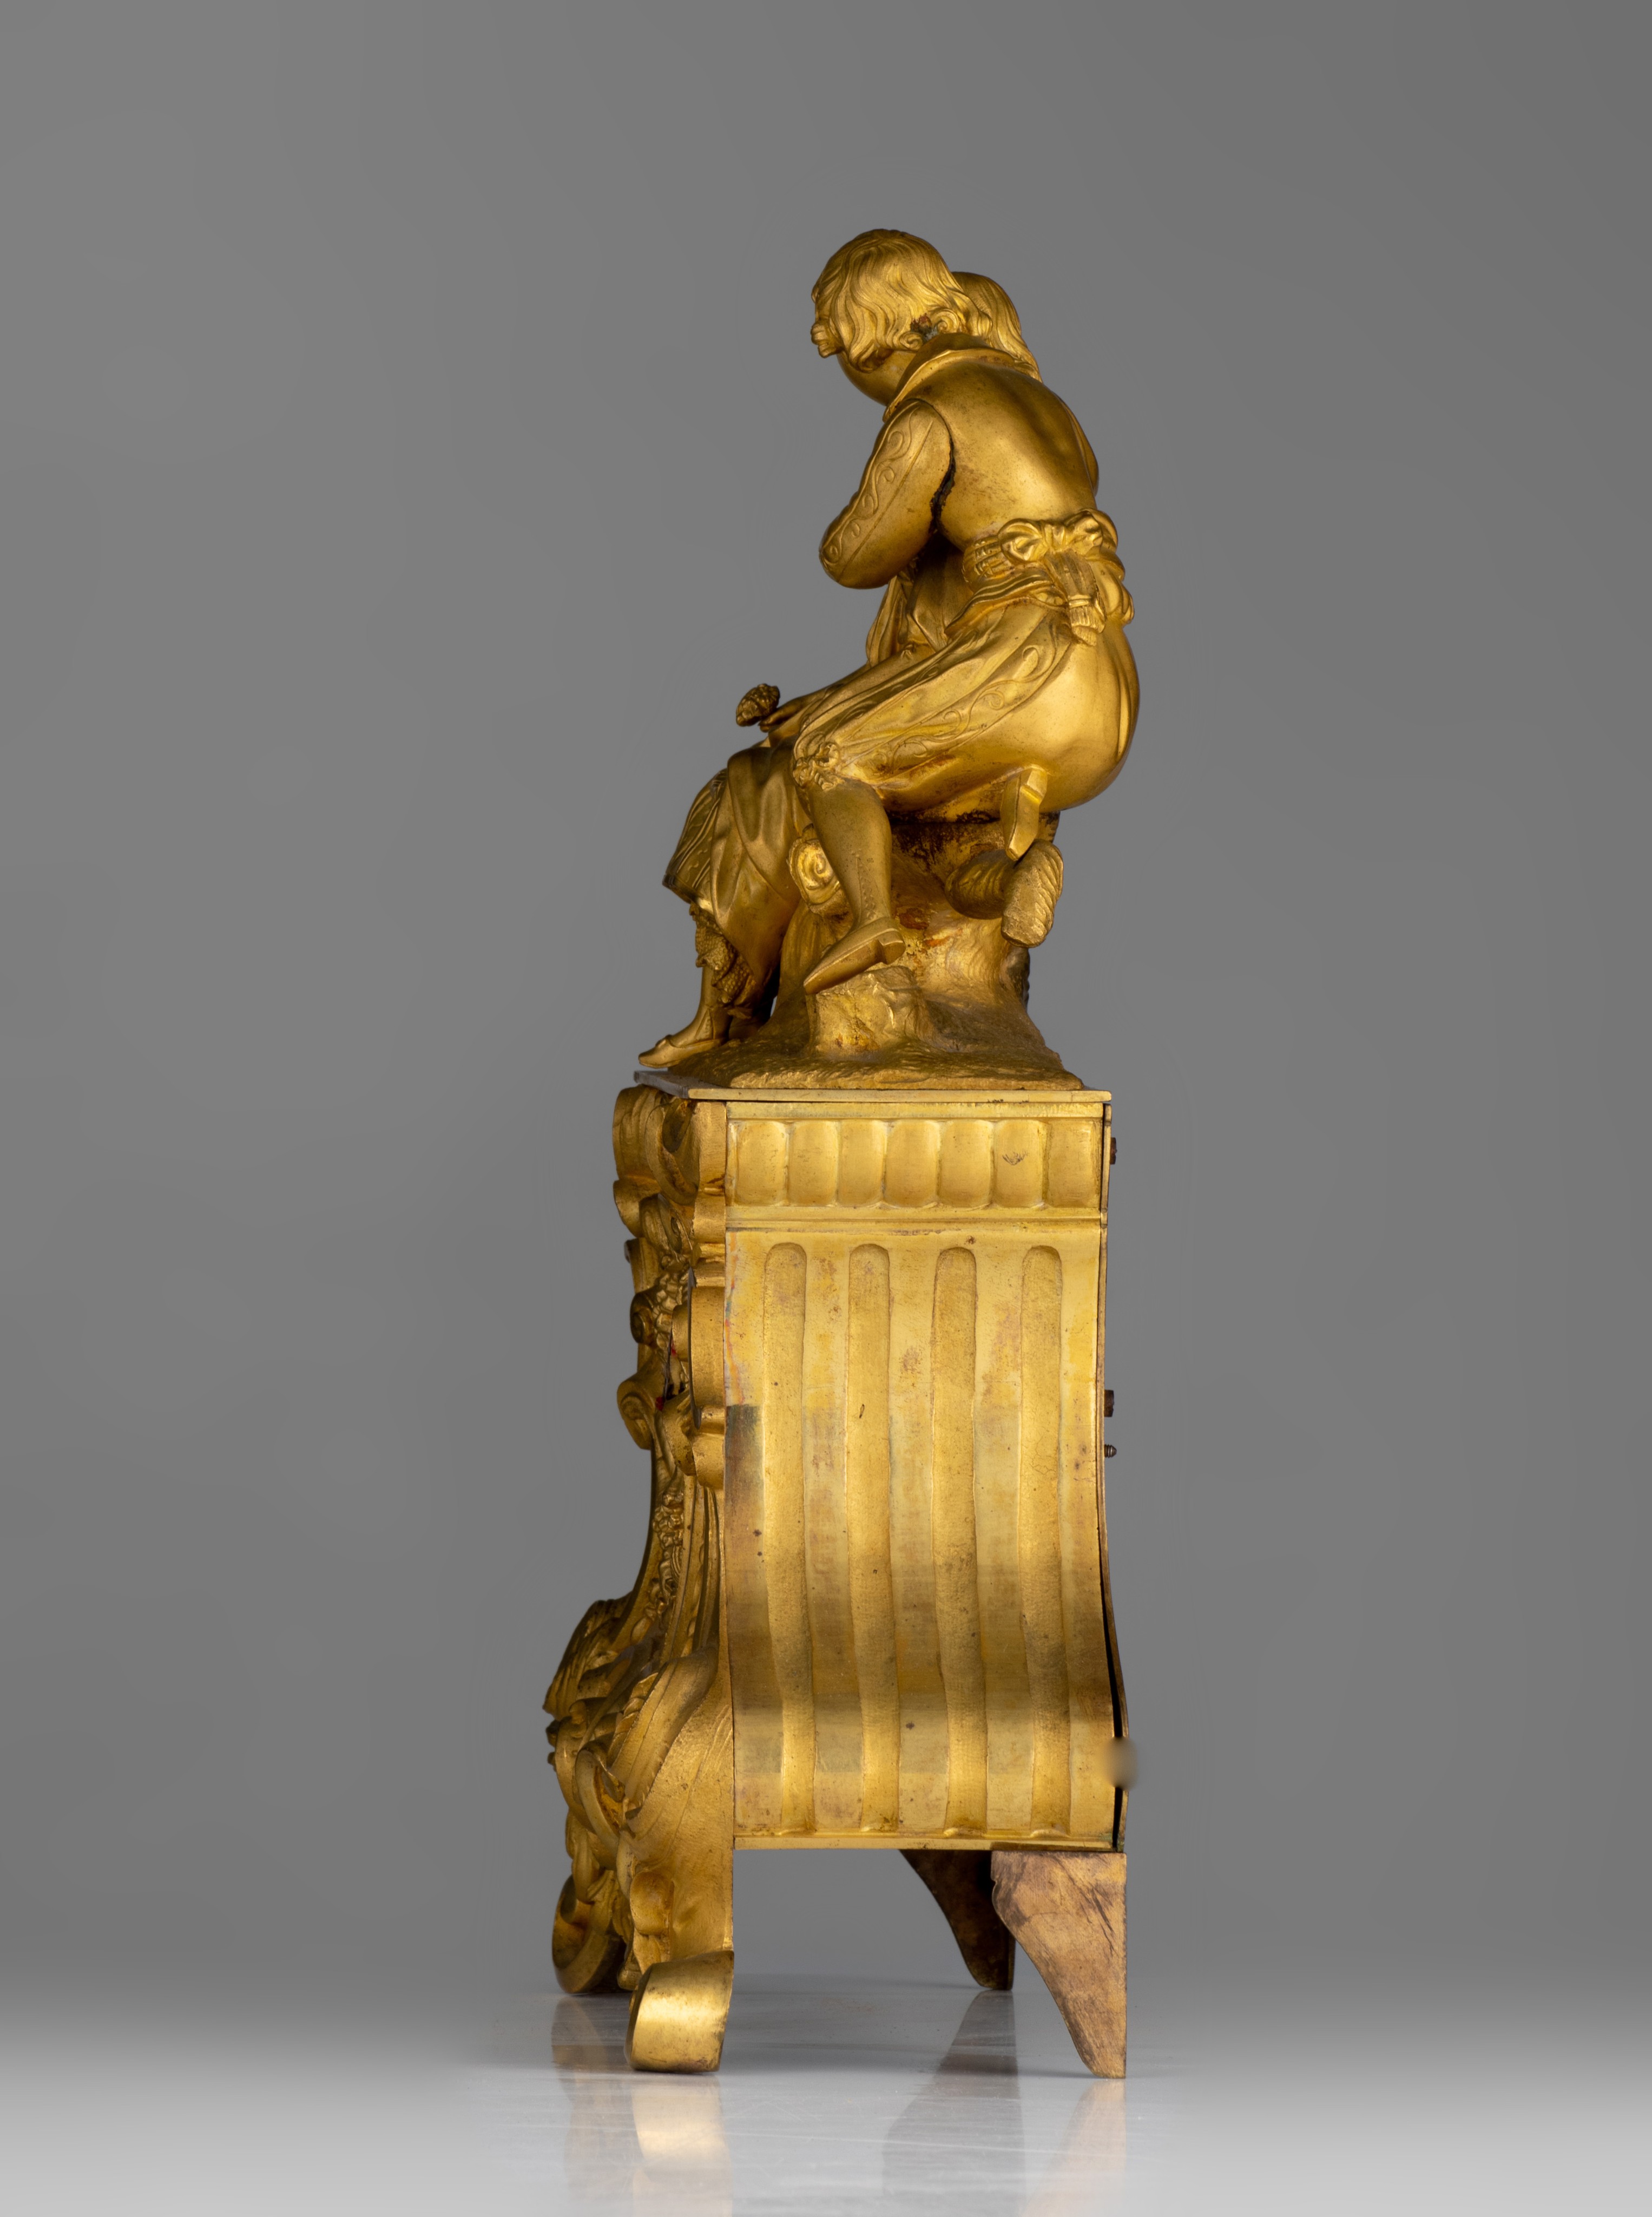 A Charles X gilt bronze mantle clock by Henri Robert, with a gallant scene, mid 19thC, H 38,5 cm - Image 3 of 9